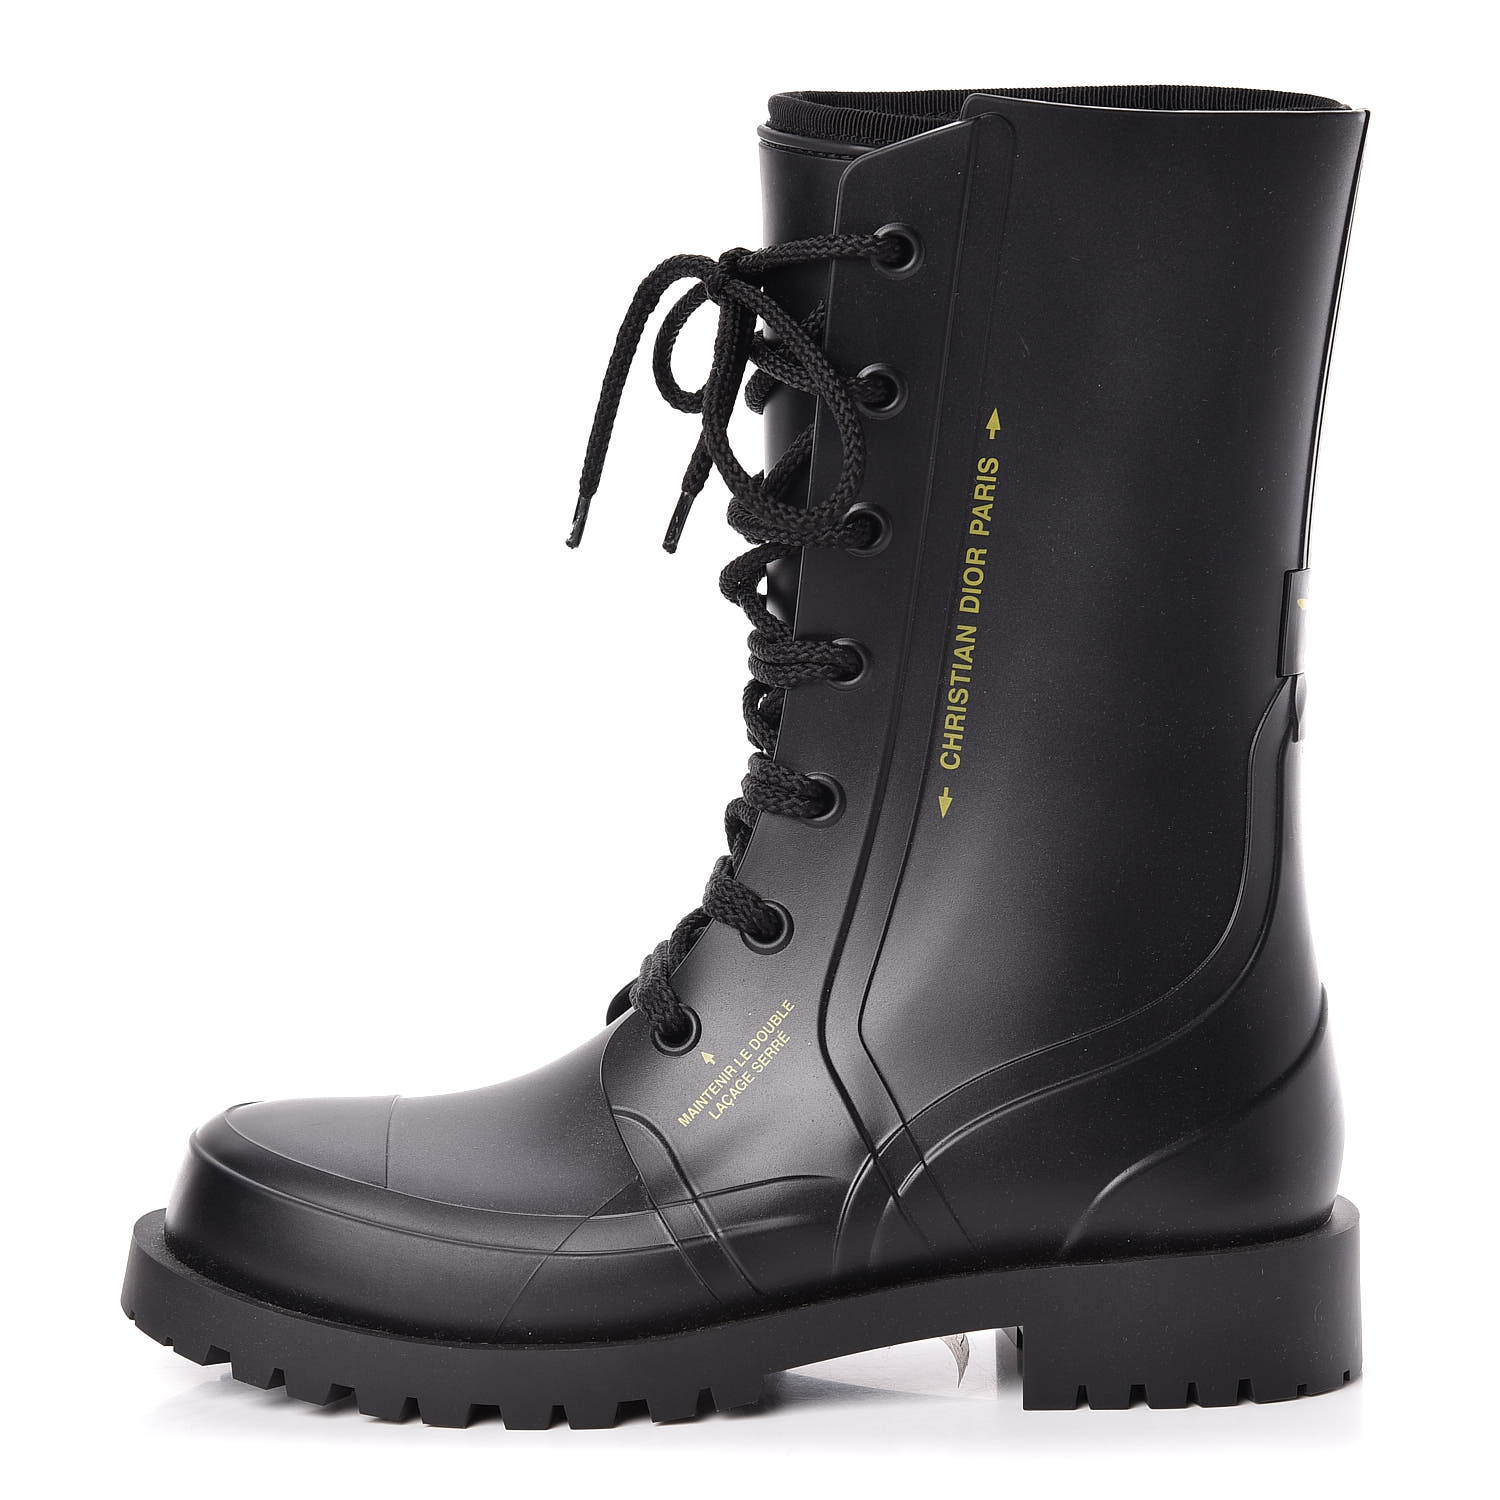 CHRISTIAN DIOR Rubber Diorcamp Low Boots 39 Black 450370